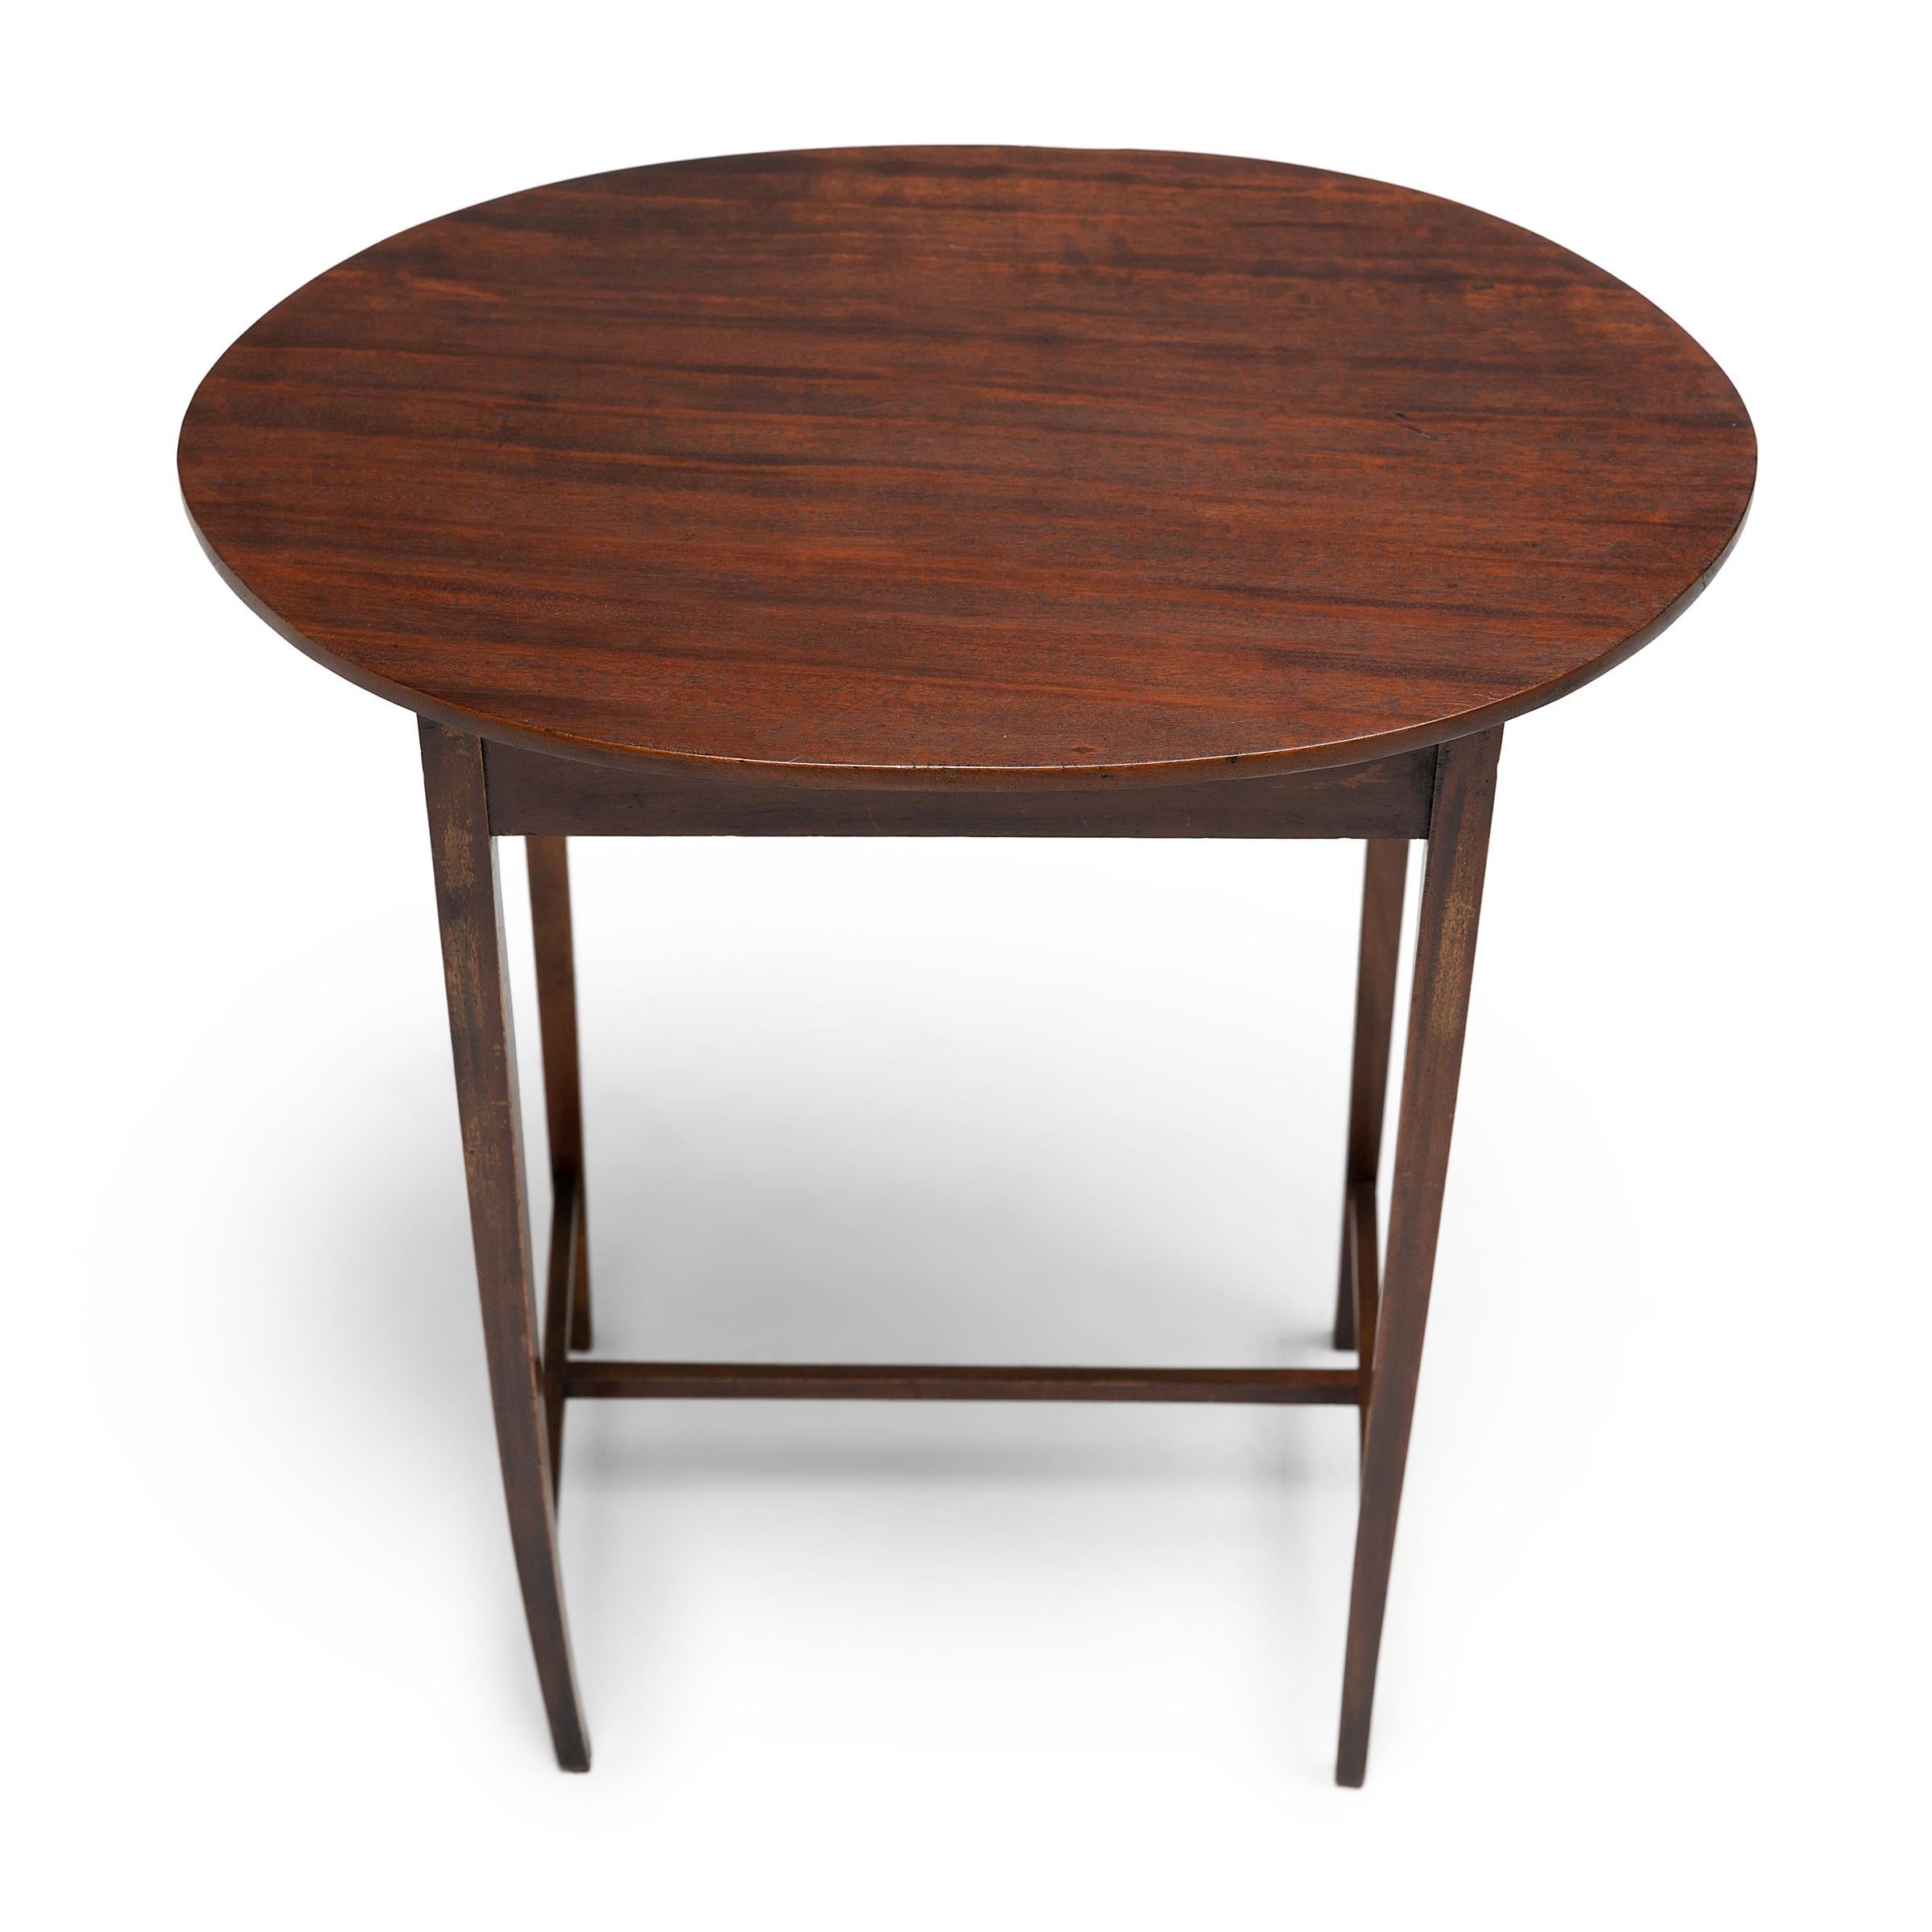 This antique English side table is elegantly crafted with a versatile and lightweight design. Recently refinished to a rich, dark brown, the small table features an oval top resting on four narrow legs linked with straight stretchers. Recalling